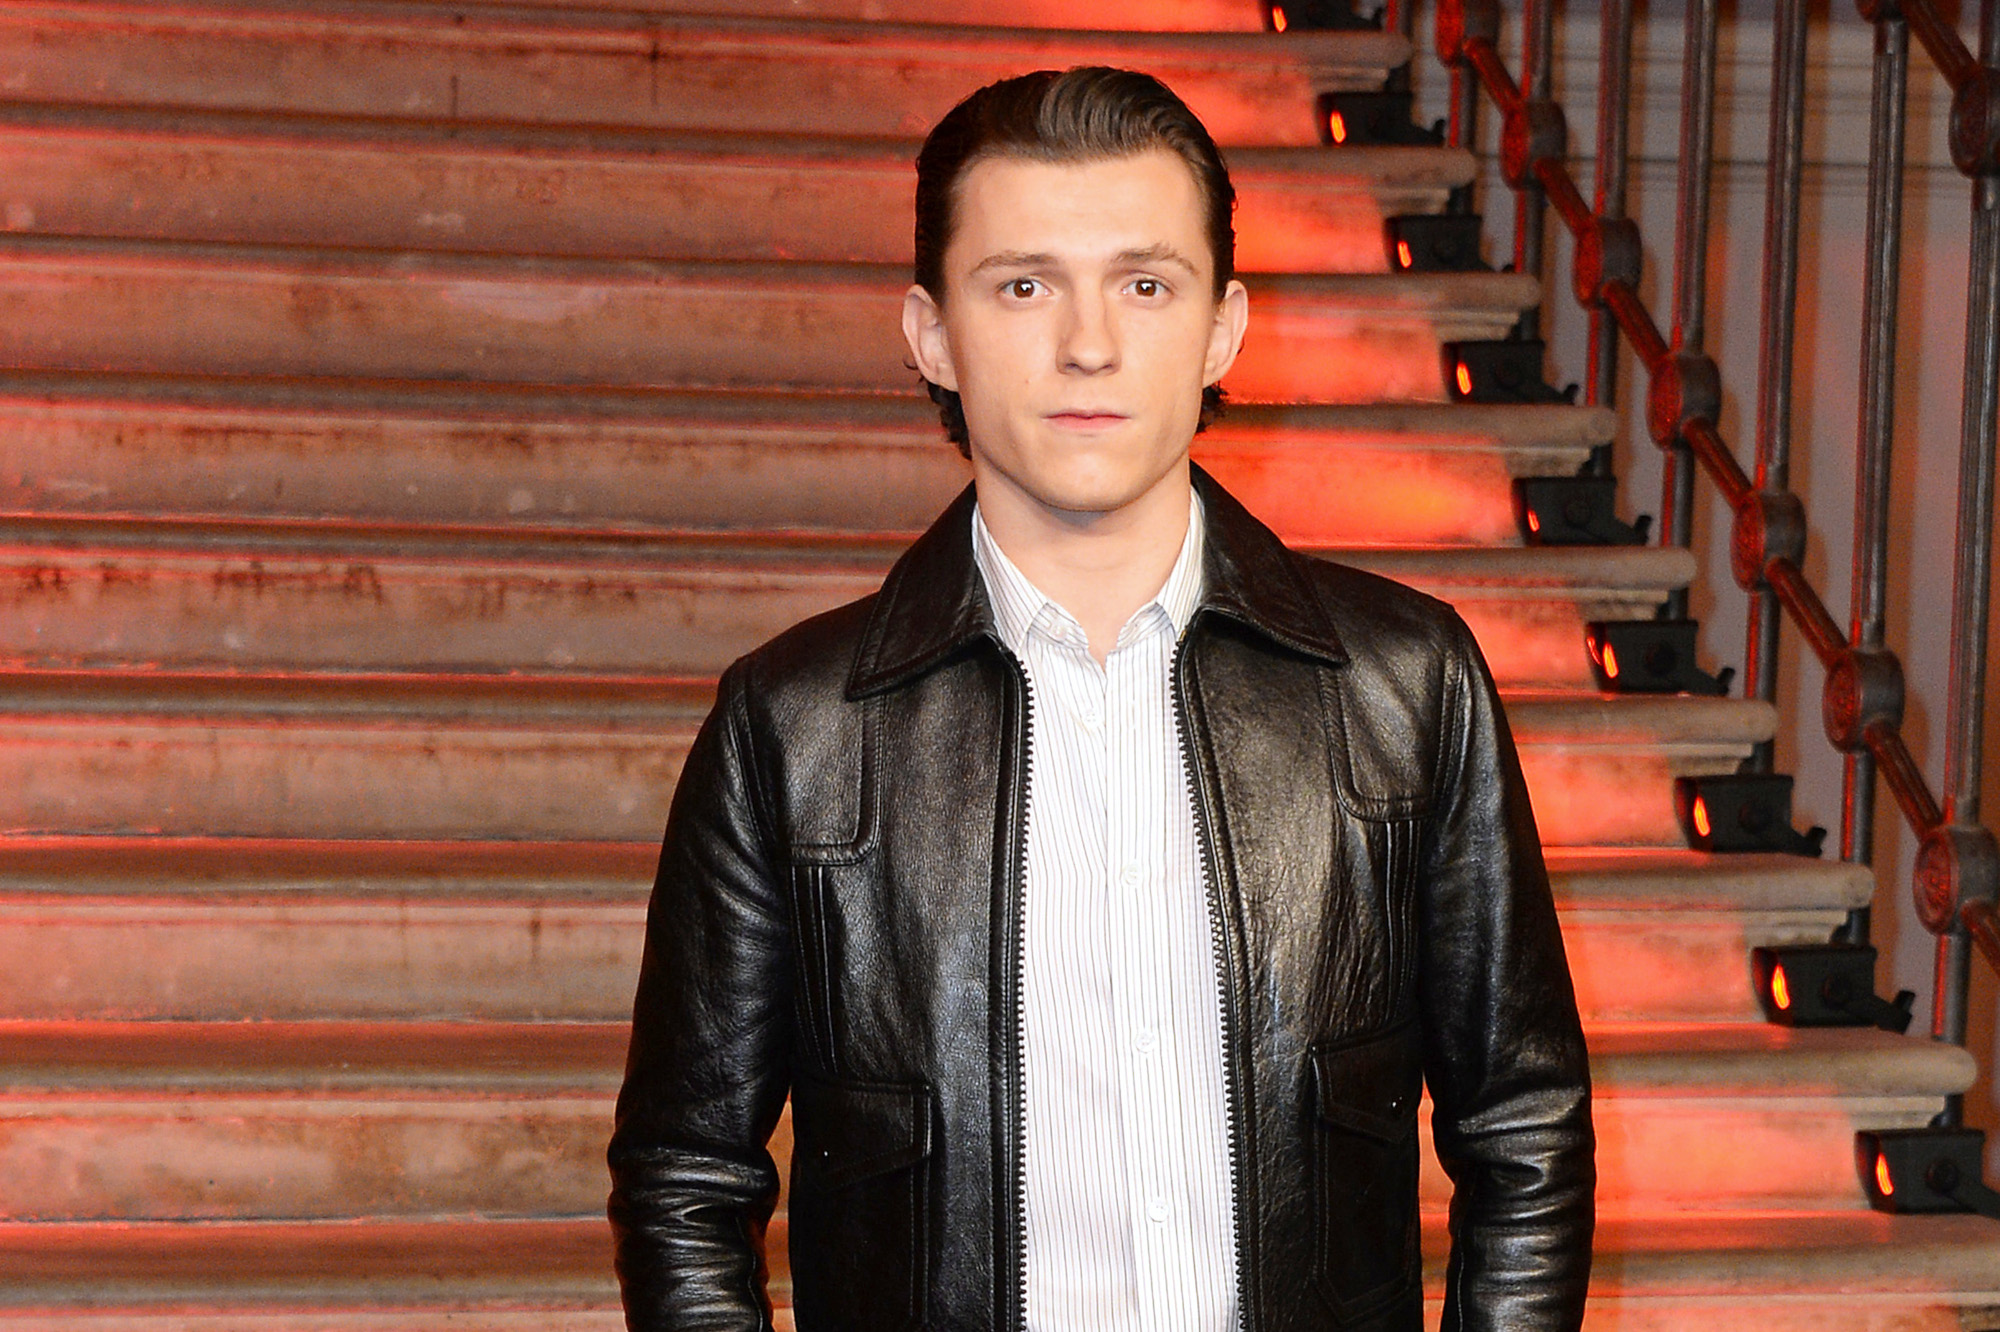 Spider-Man star Tom Holland wearing a black leather jacket and white button-up shirt. His hair is slicked back, and he's looking at the camera.